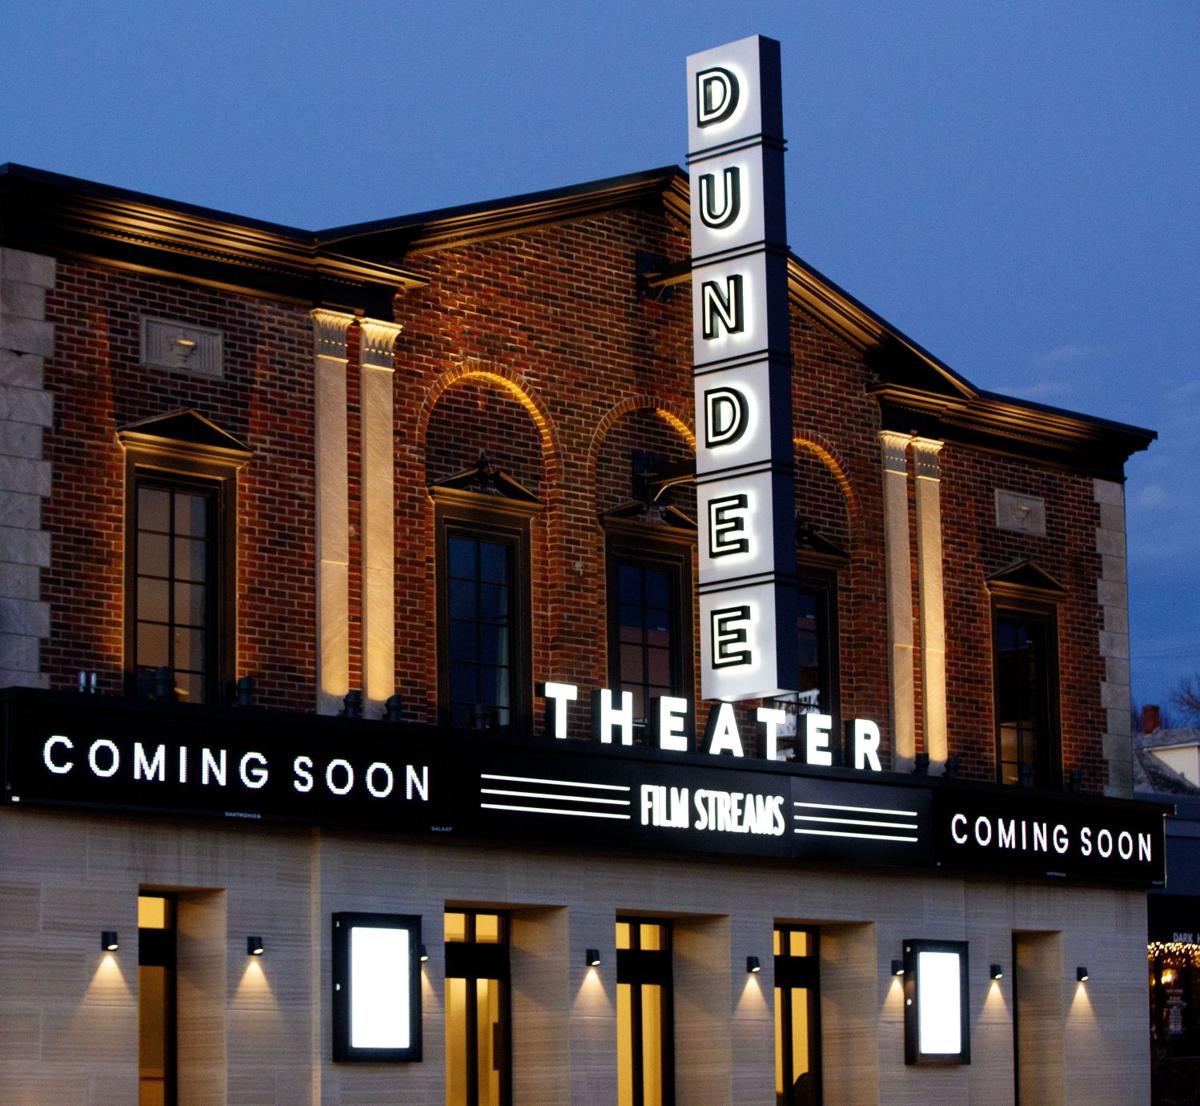 Dundee Theater through the years